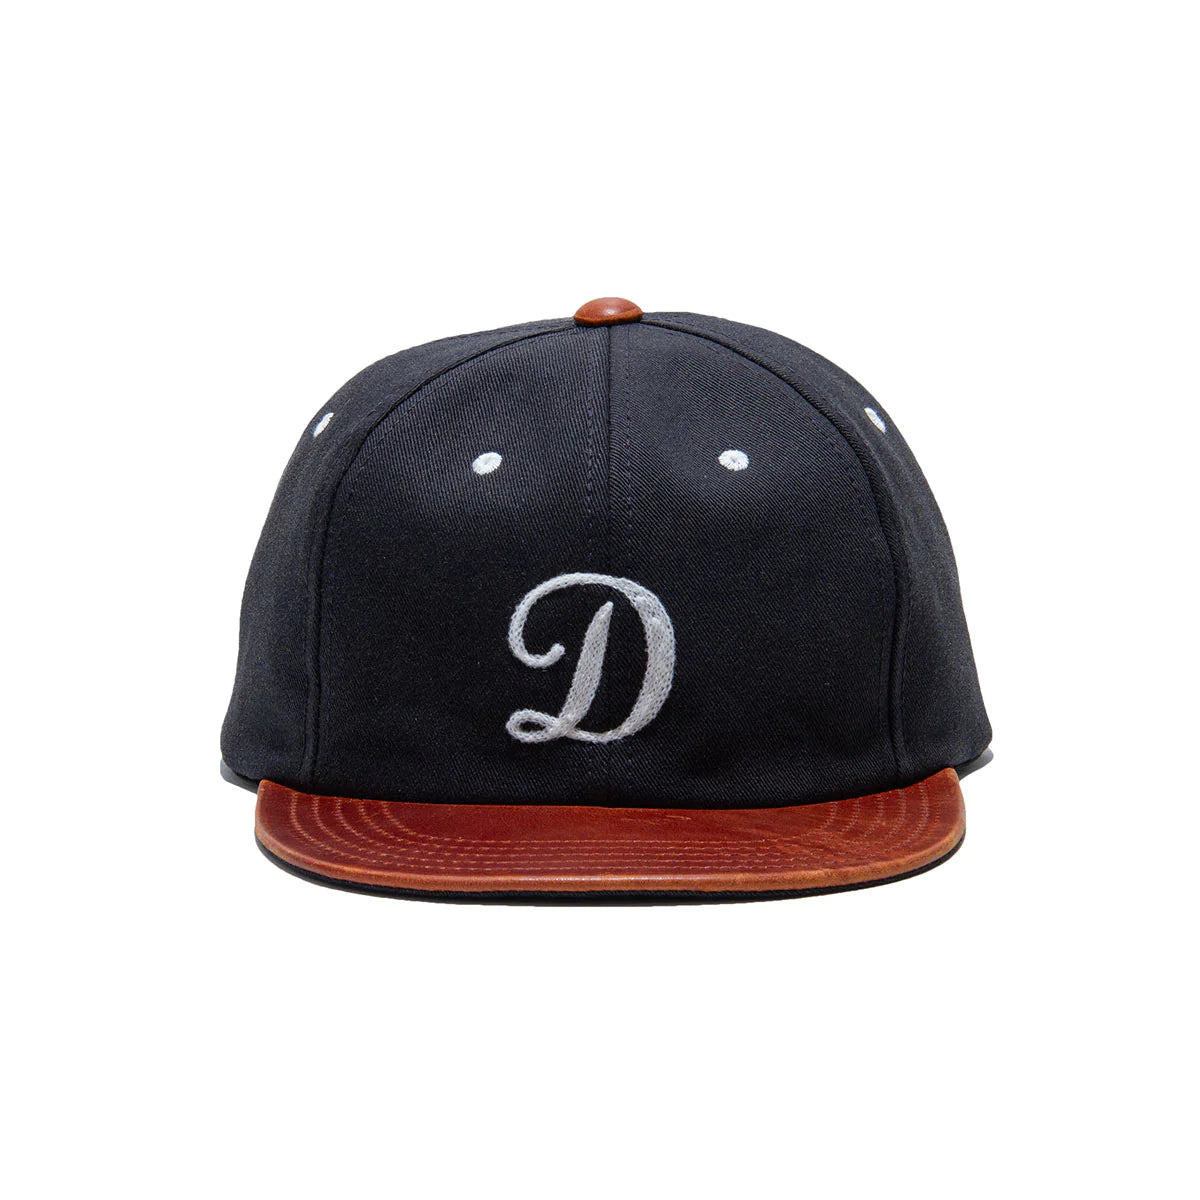 The H.W. Dog & Co - 2 TONE LEATHER COTTON CAP - Navy